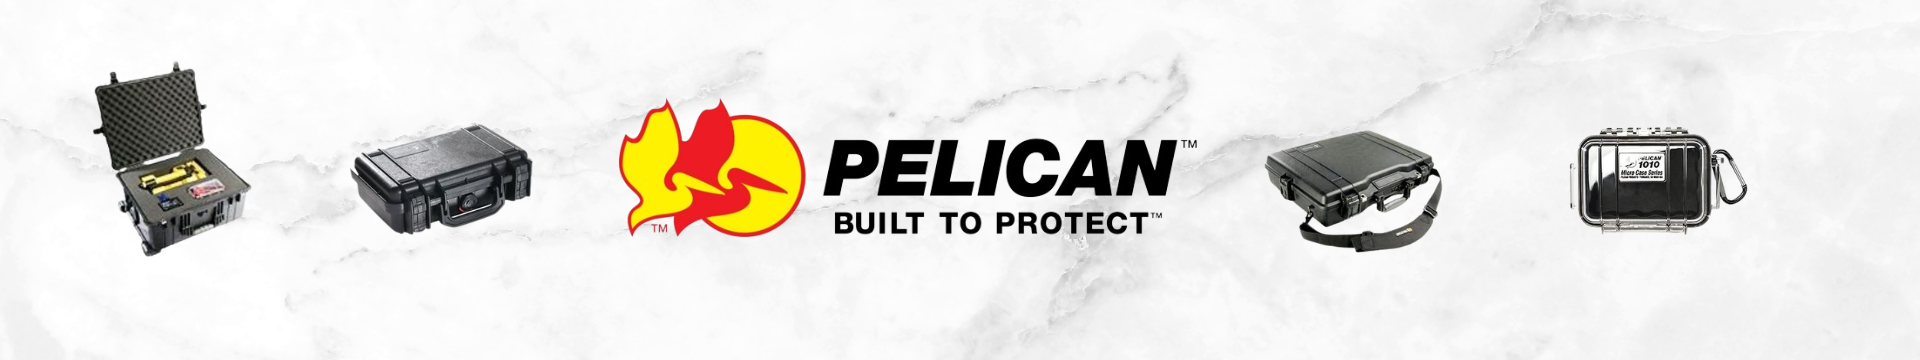 PELICAN PRODUCTS, BUY PELICAN PRODUCTS, CASES